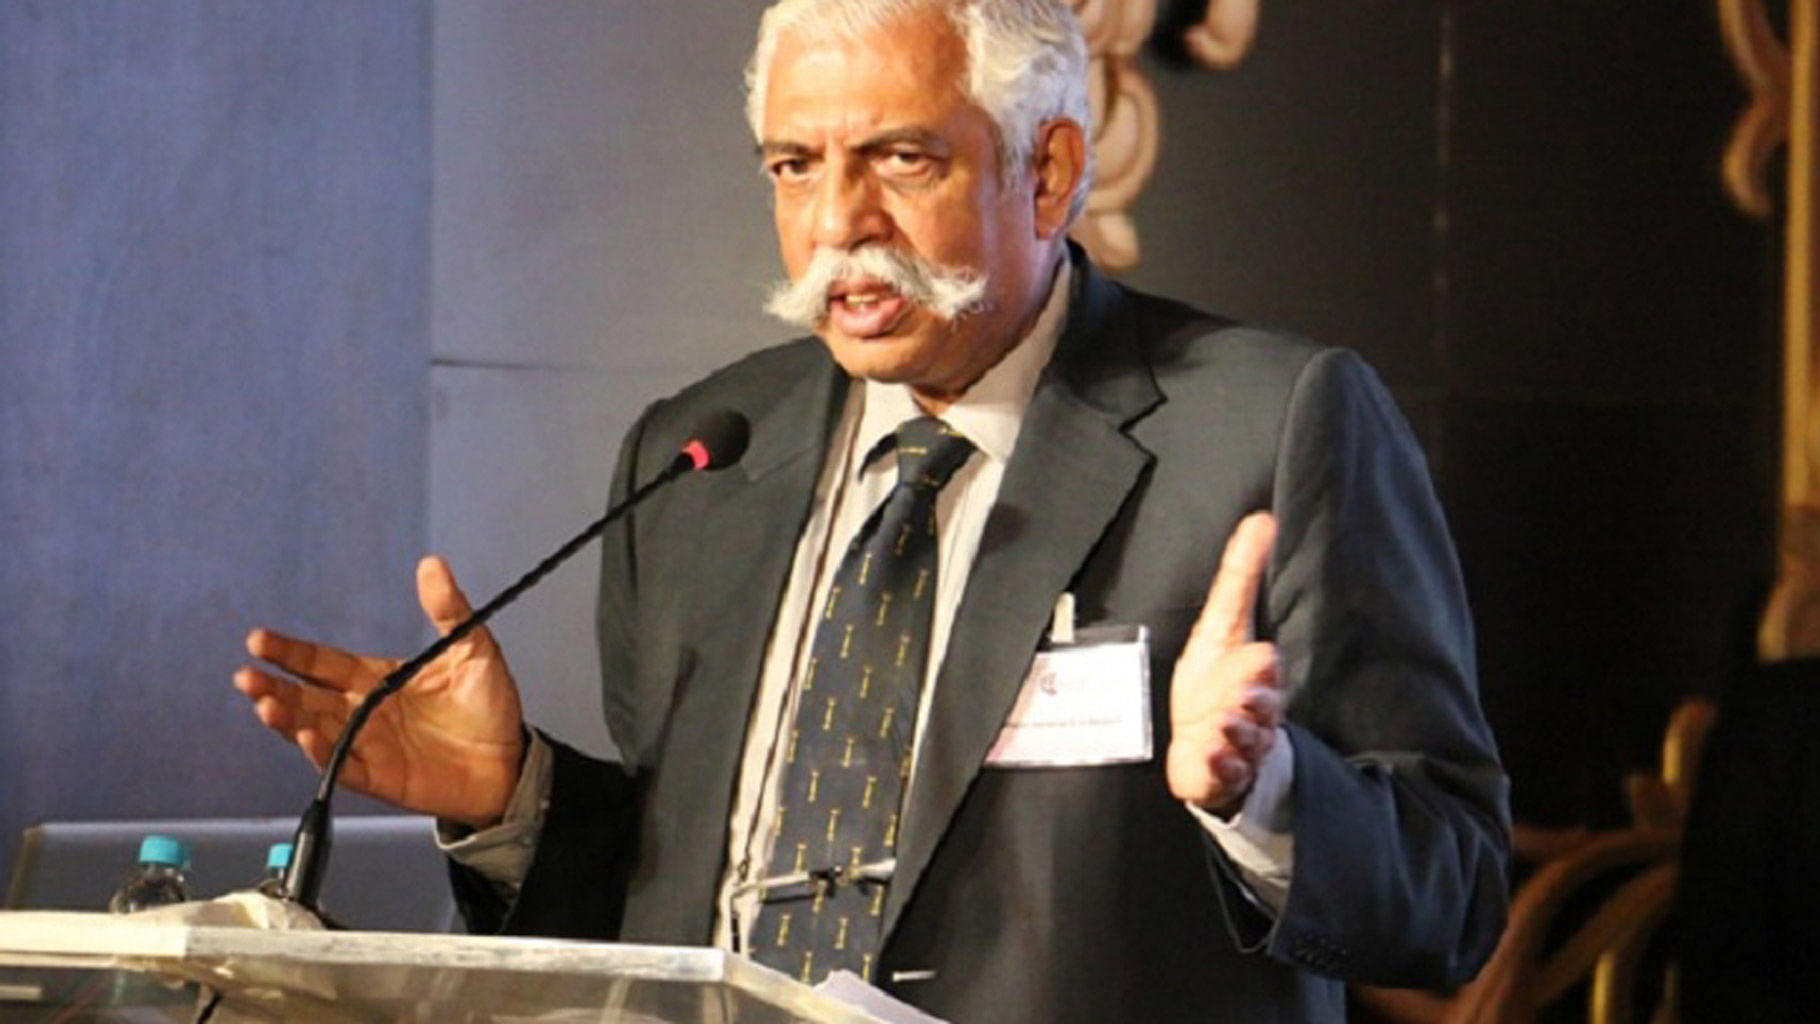 Retired army officer Major General GD Bakshi’s lecture has been termed “jingoistic” by a student. (Photo Courtesy: The News Minute)